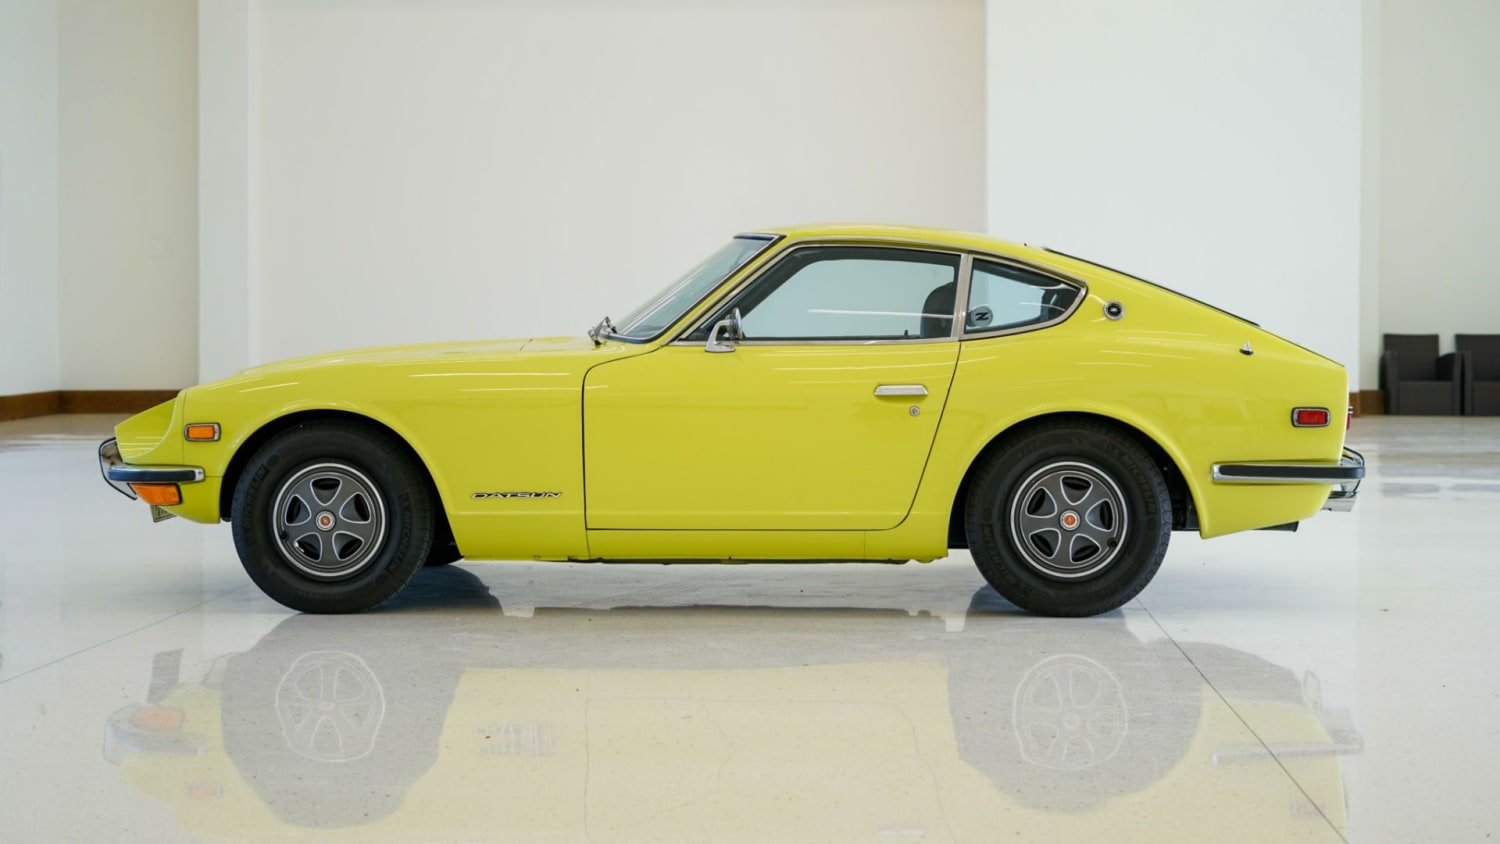 Factory-Commissioned Datsun 240Z Restoration Sells for Over $100K at Auction